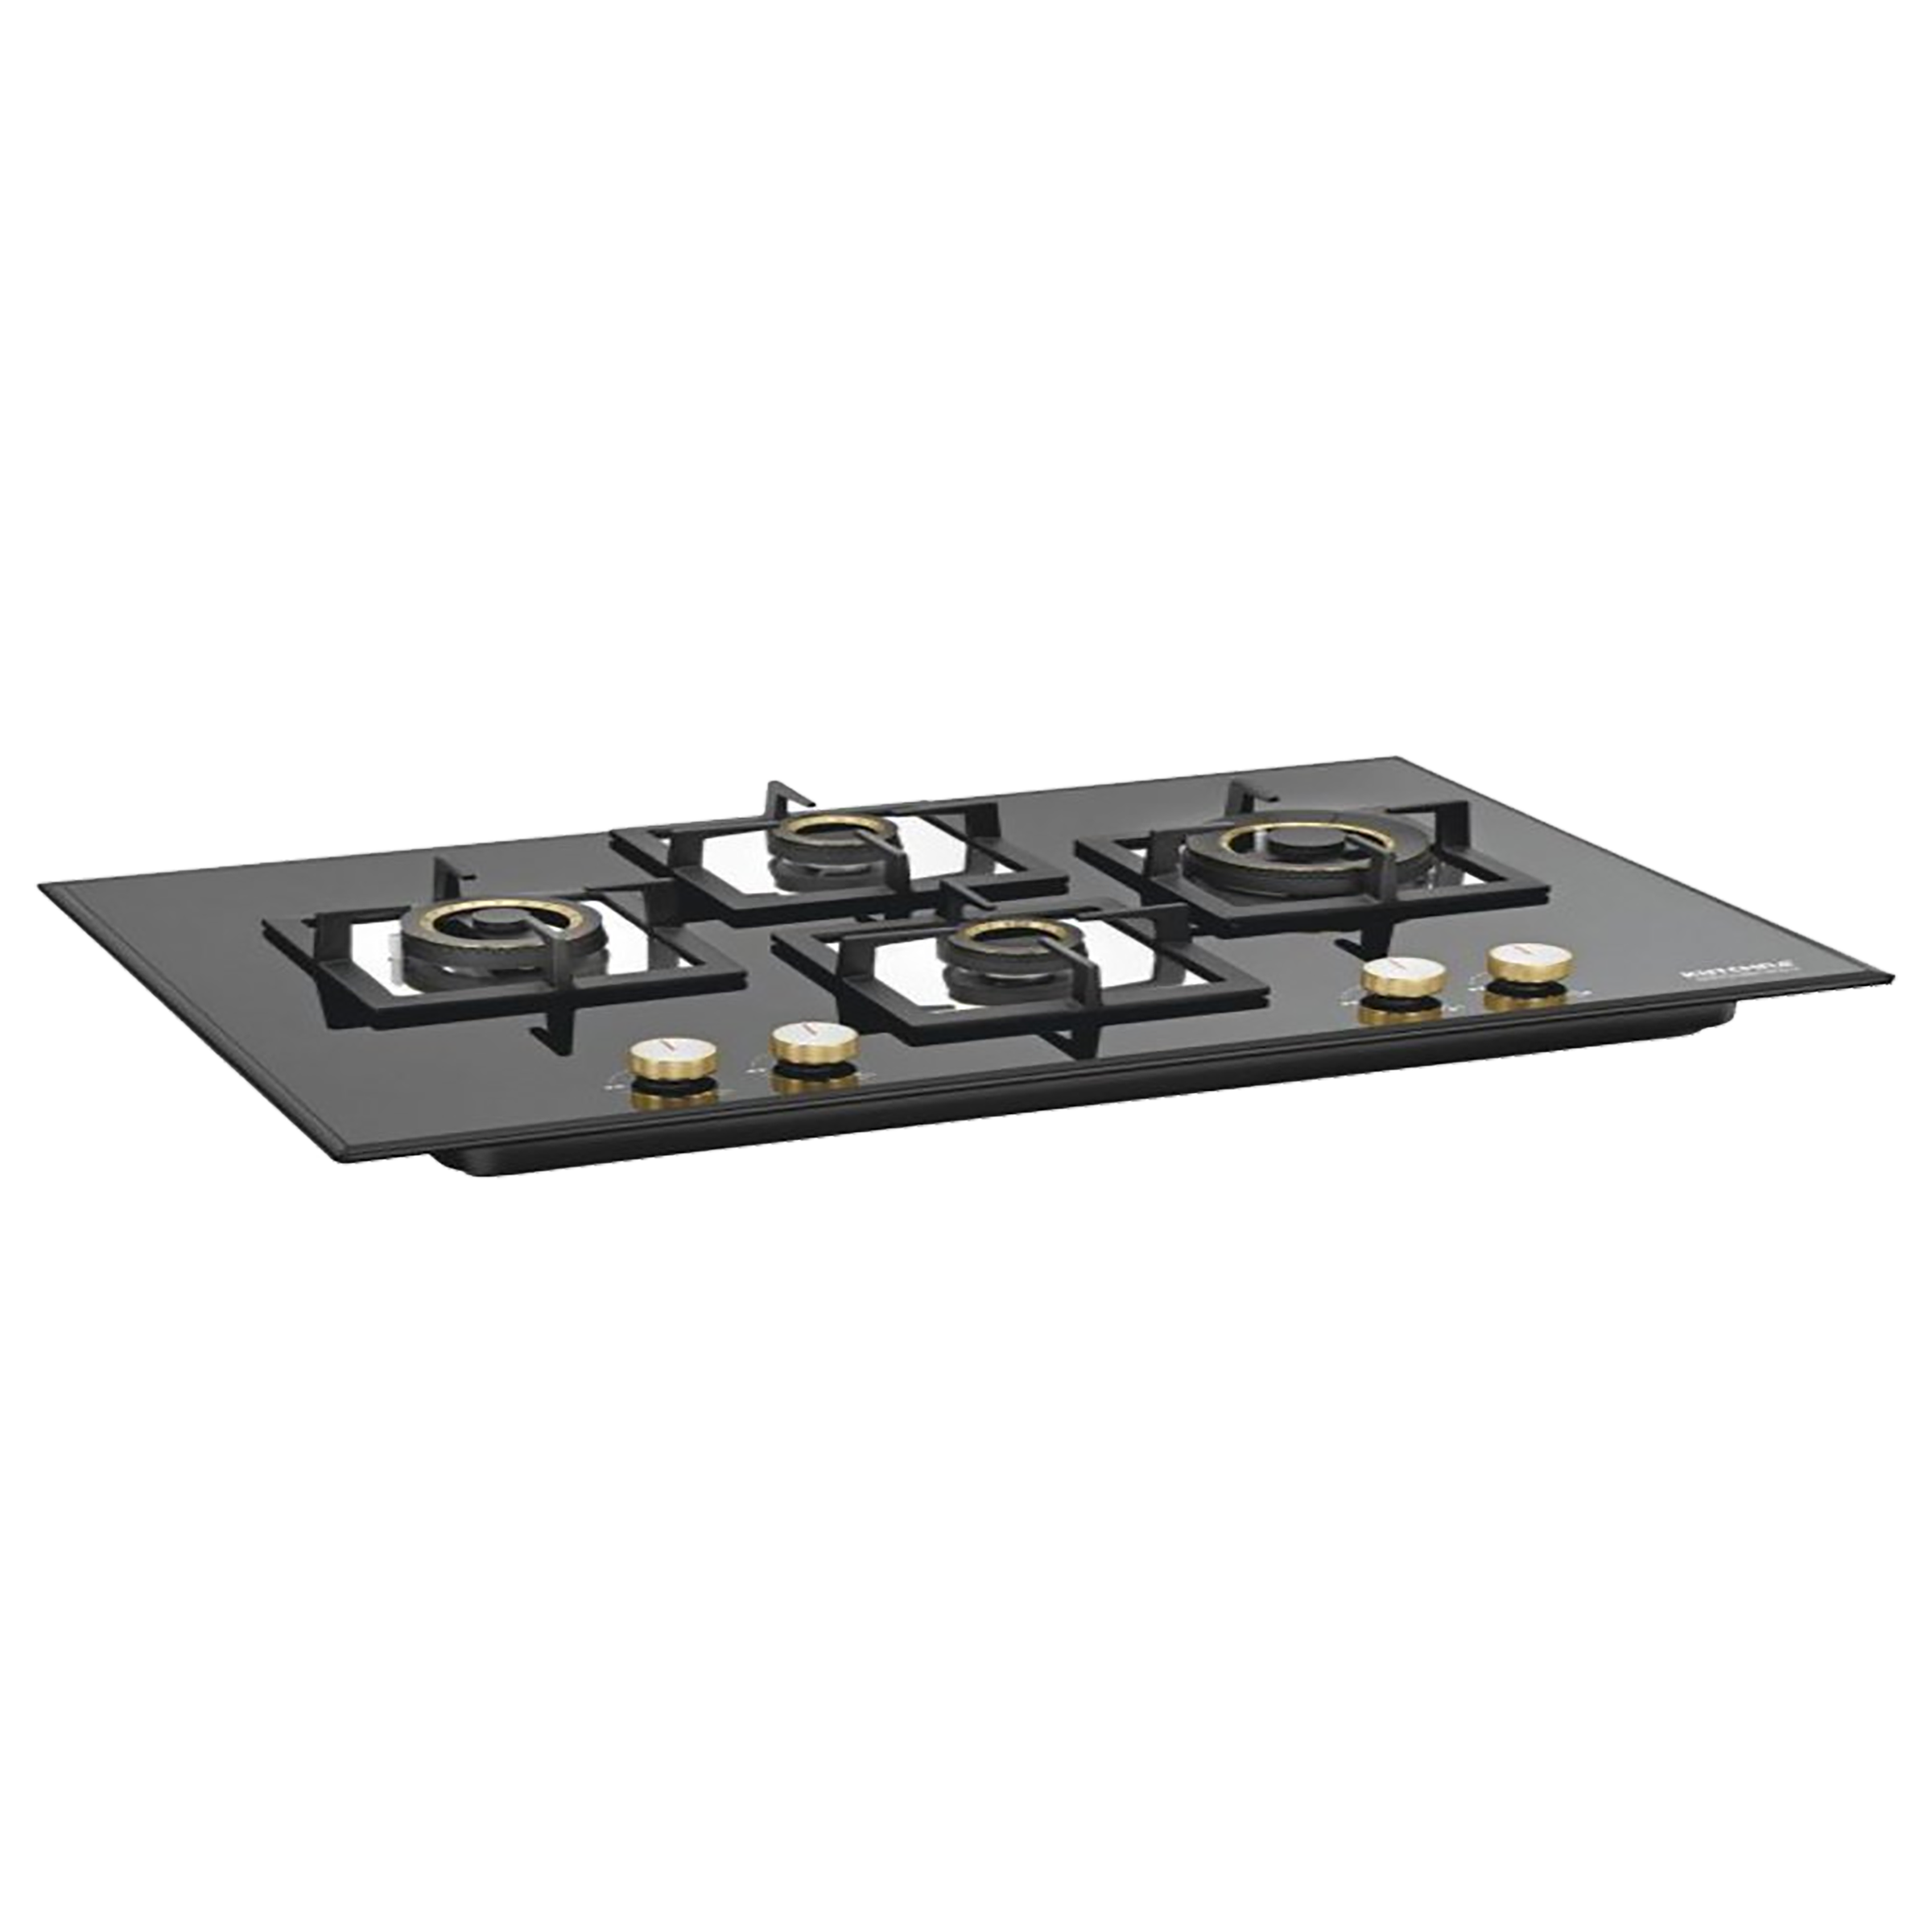 Kutchina Marica 4 Burner Tempered Glass Built-in Gas Stove (Aesthetic Designs, MARICA 4BS 90 DLX, Black)